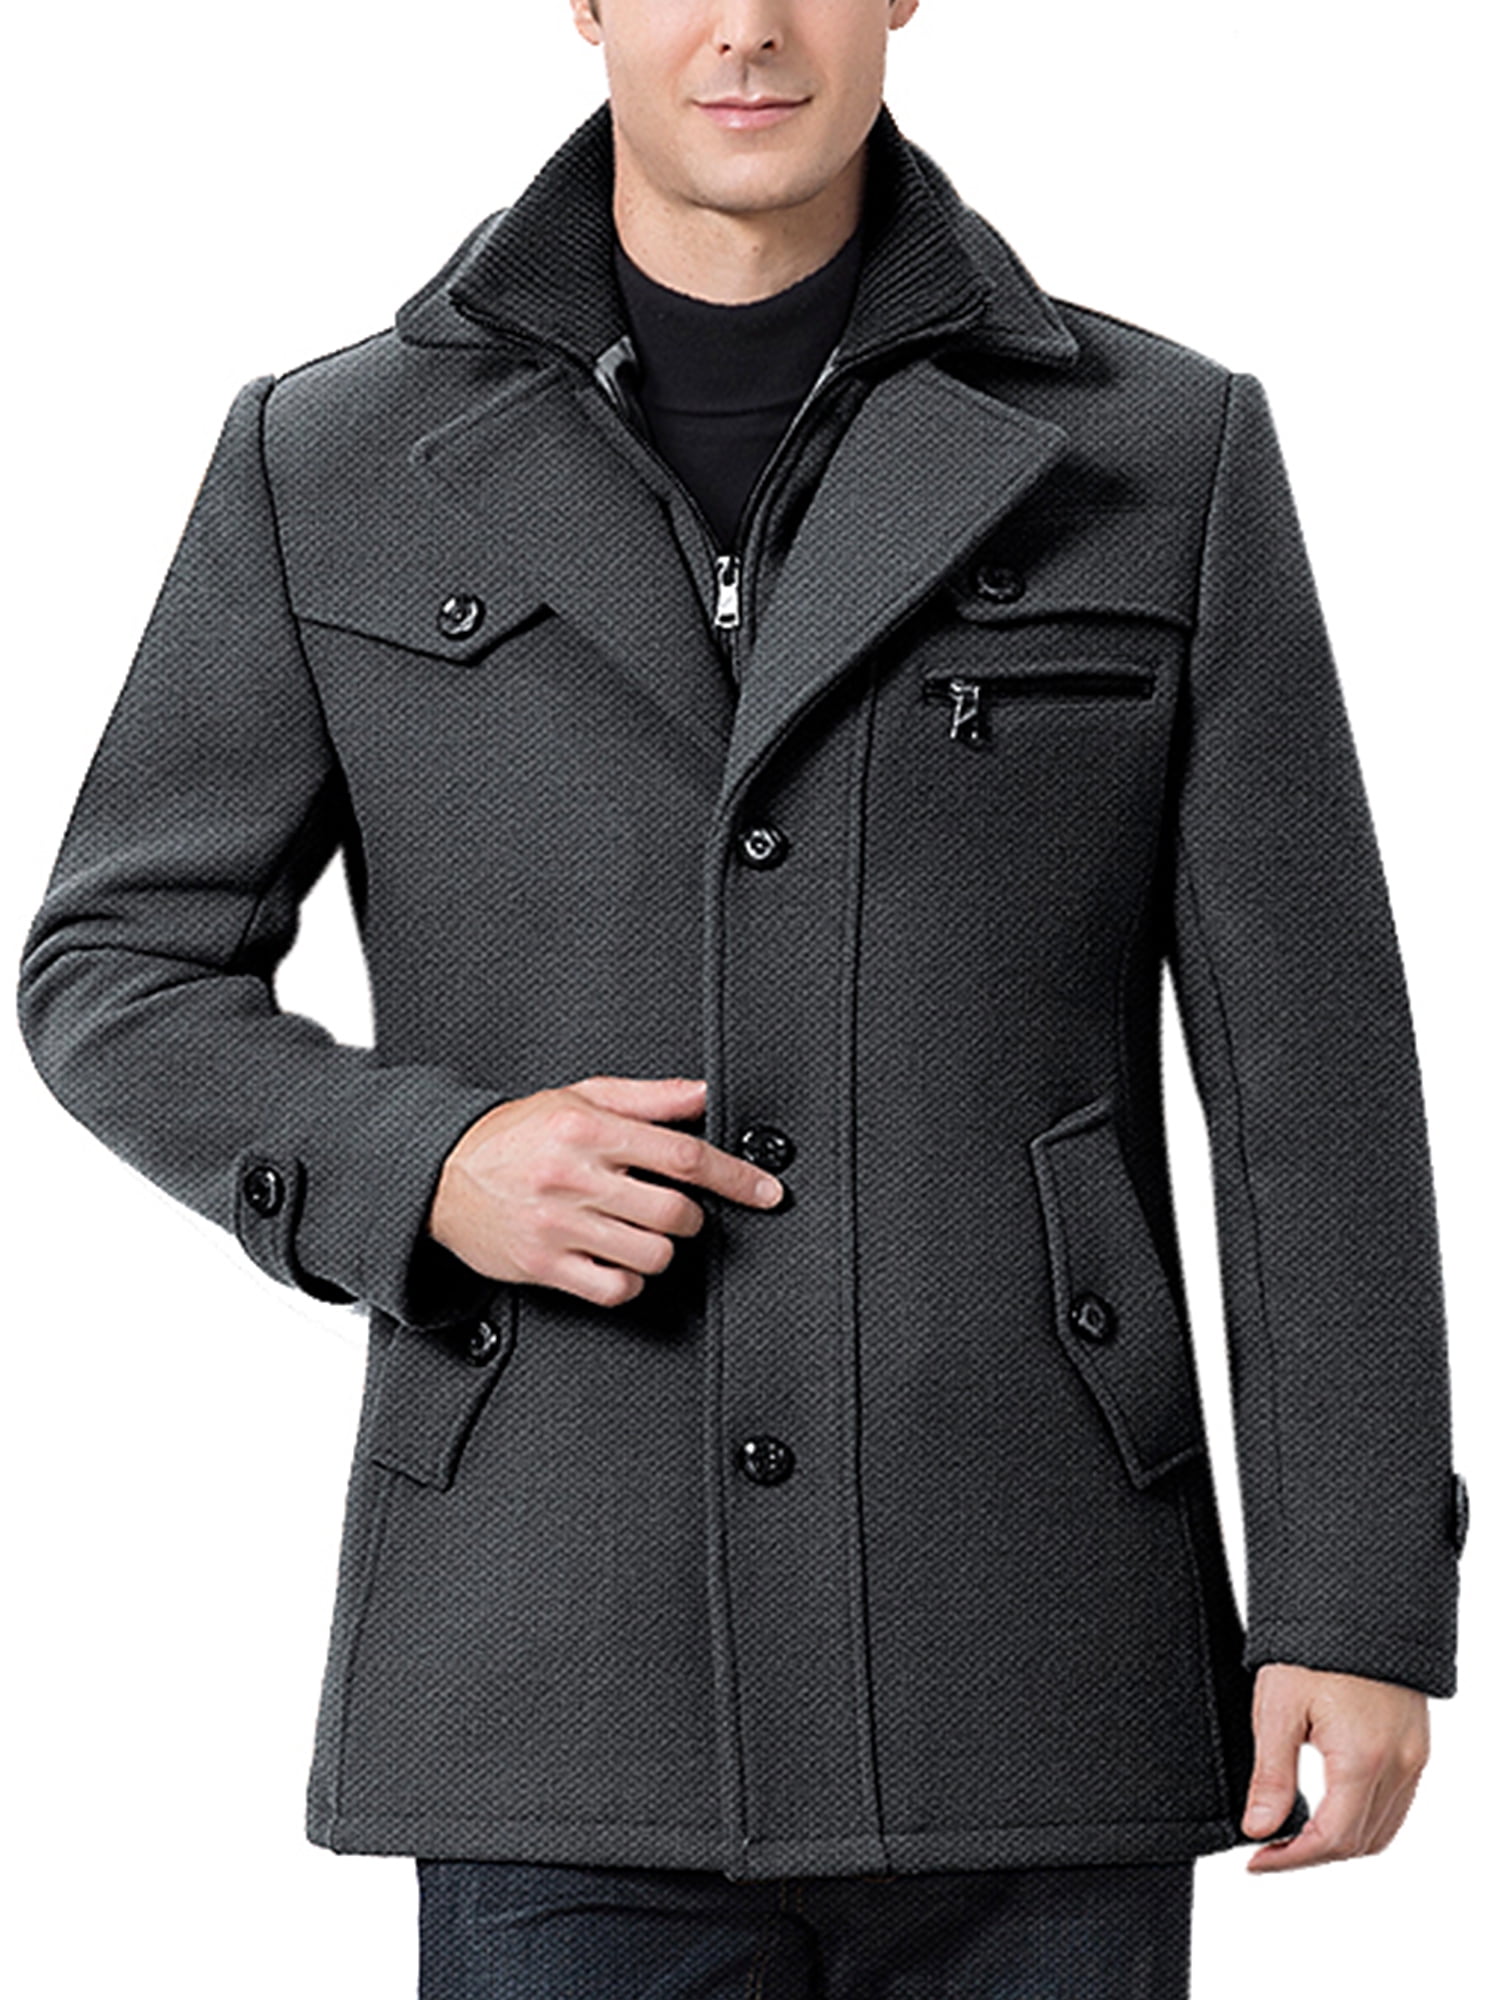 M-4XL Mens Winter Wool Blend Warm Trench Coat Jacket Single Breasted Peacoat Top